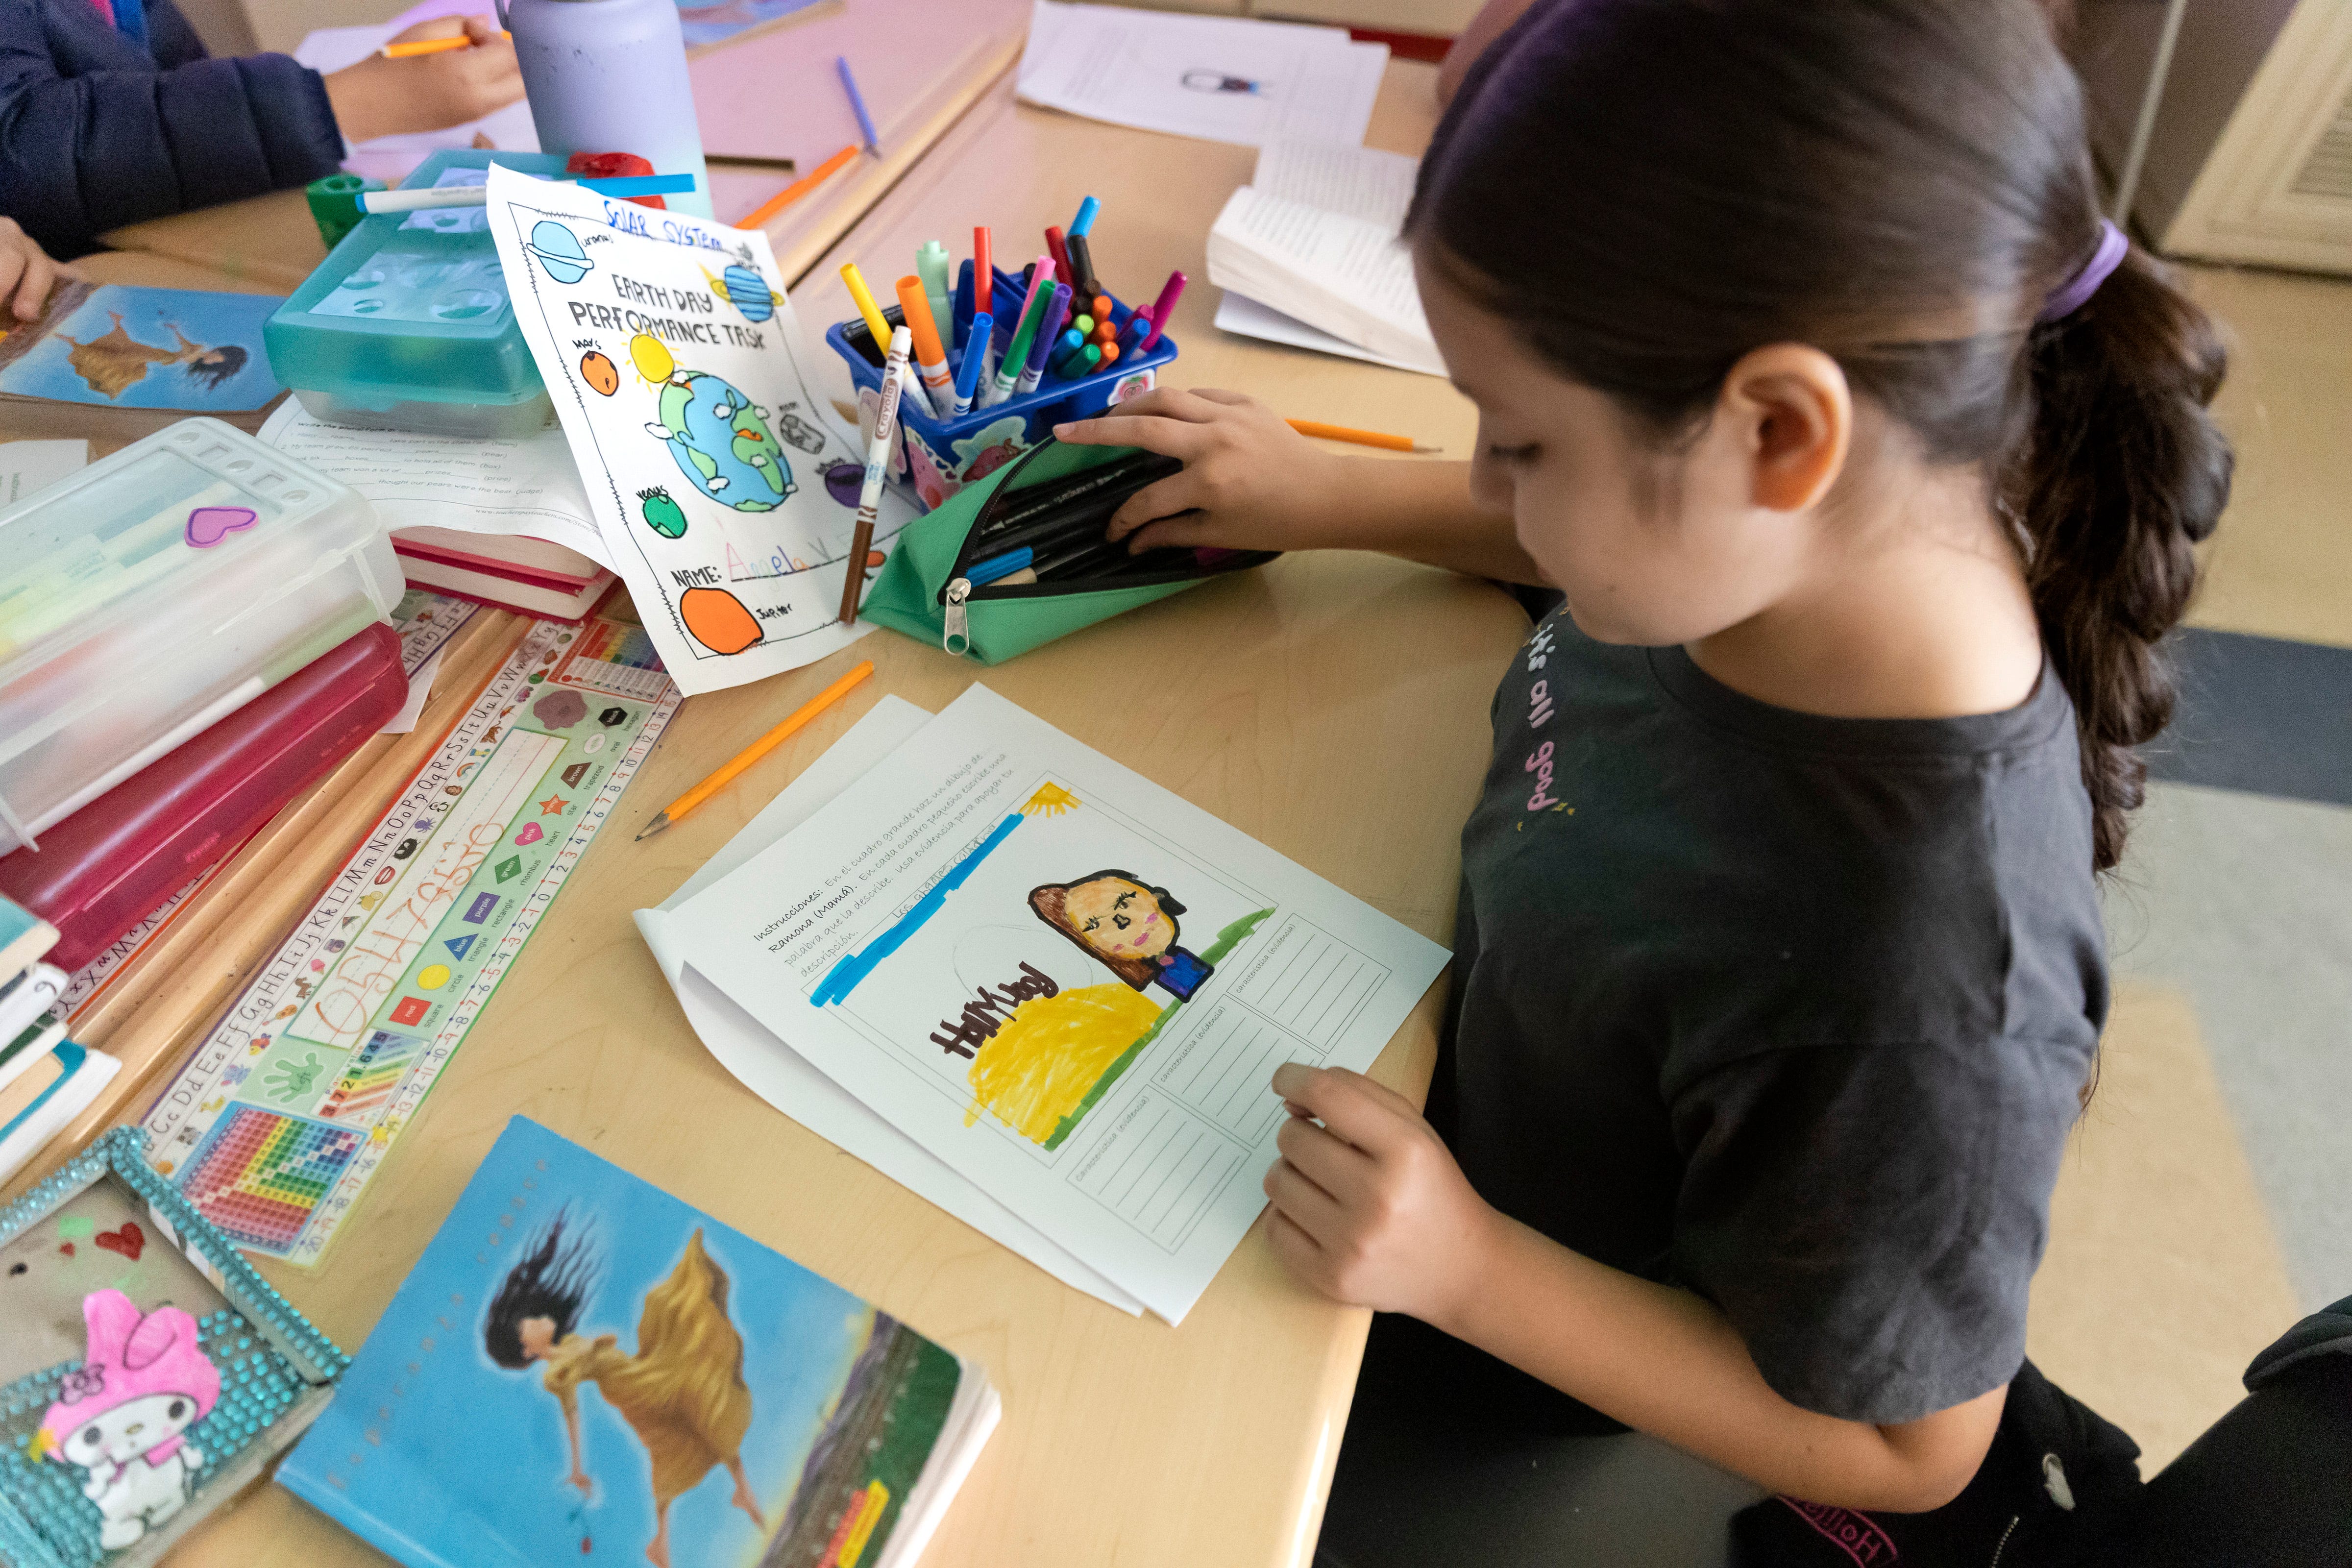 Valeria Escobedo Martinez works on a project during class at Downer Elementary in San Pablo, Calif.